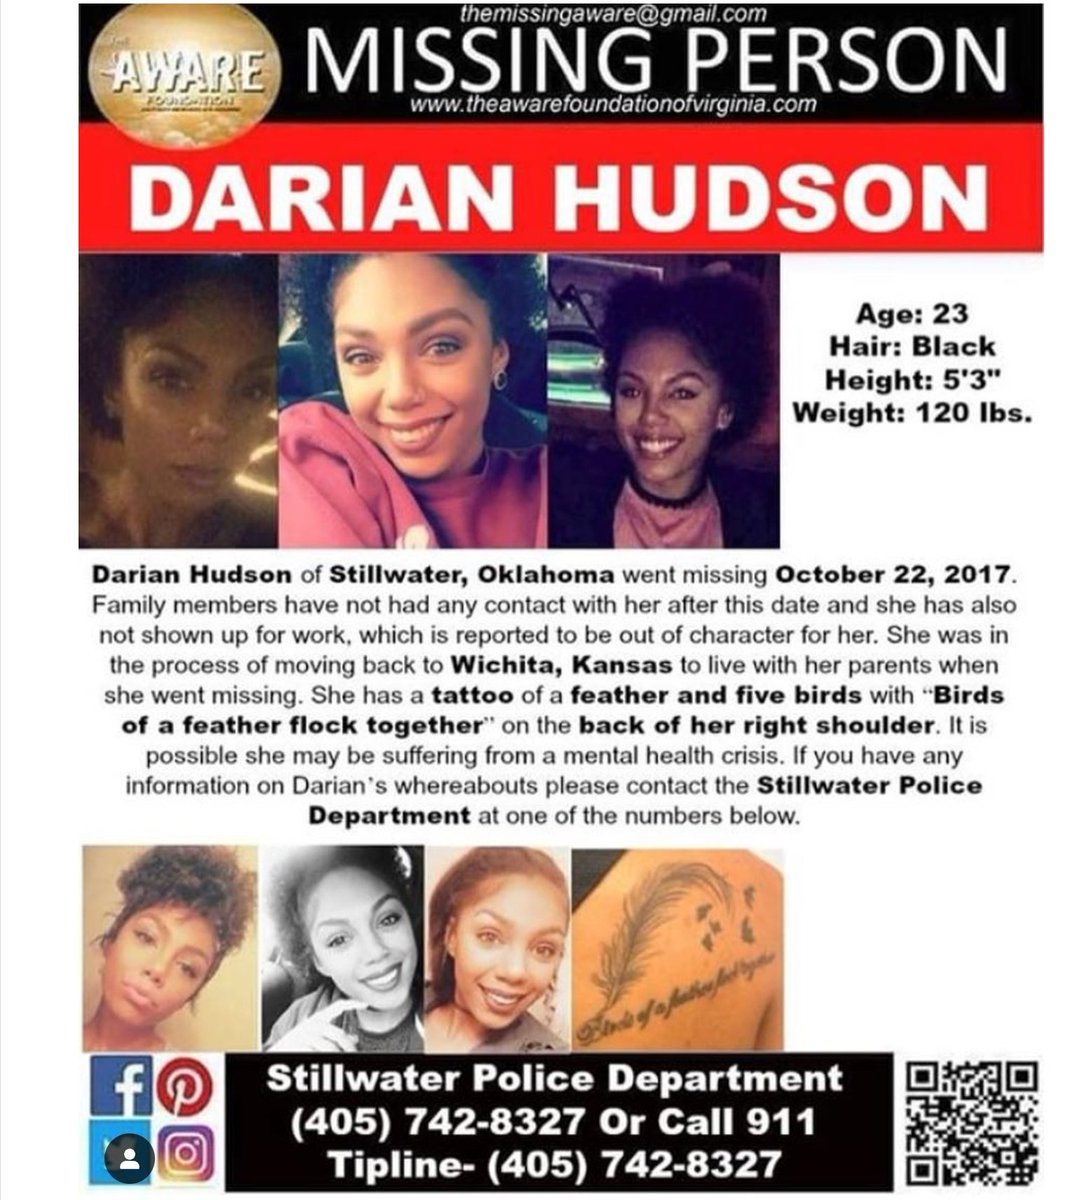 #DarianHudson #missing since 10/22/17 from #Stillwater #Oklahoma. She would be about 30 now, she has light complexion, is 5'3, 120lbs, has Medium Length Black Hair and Brown Eyes. Please call Stillwater PD 405-742-8327 or 911 #HelpFind #Missing #NotForgotten #FindHer